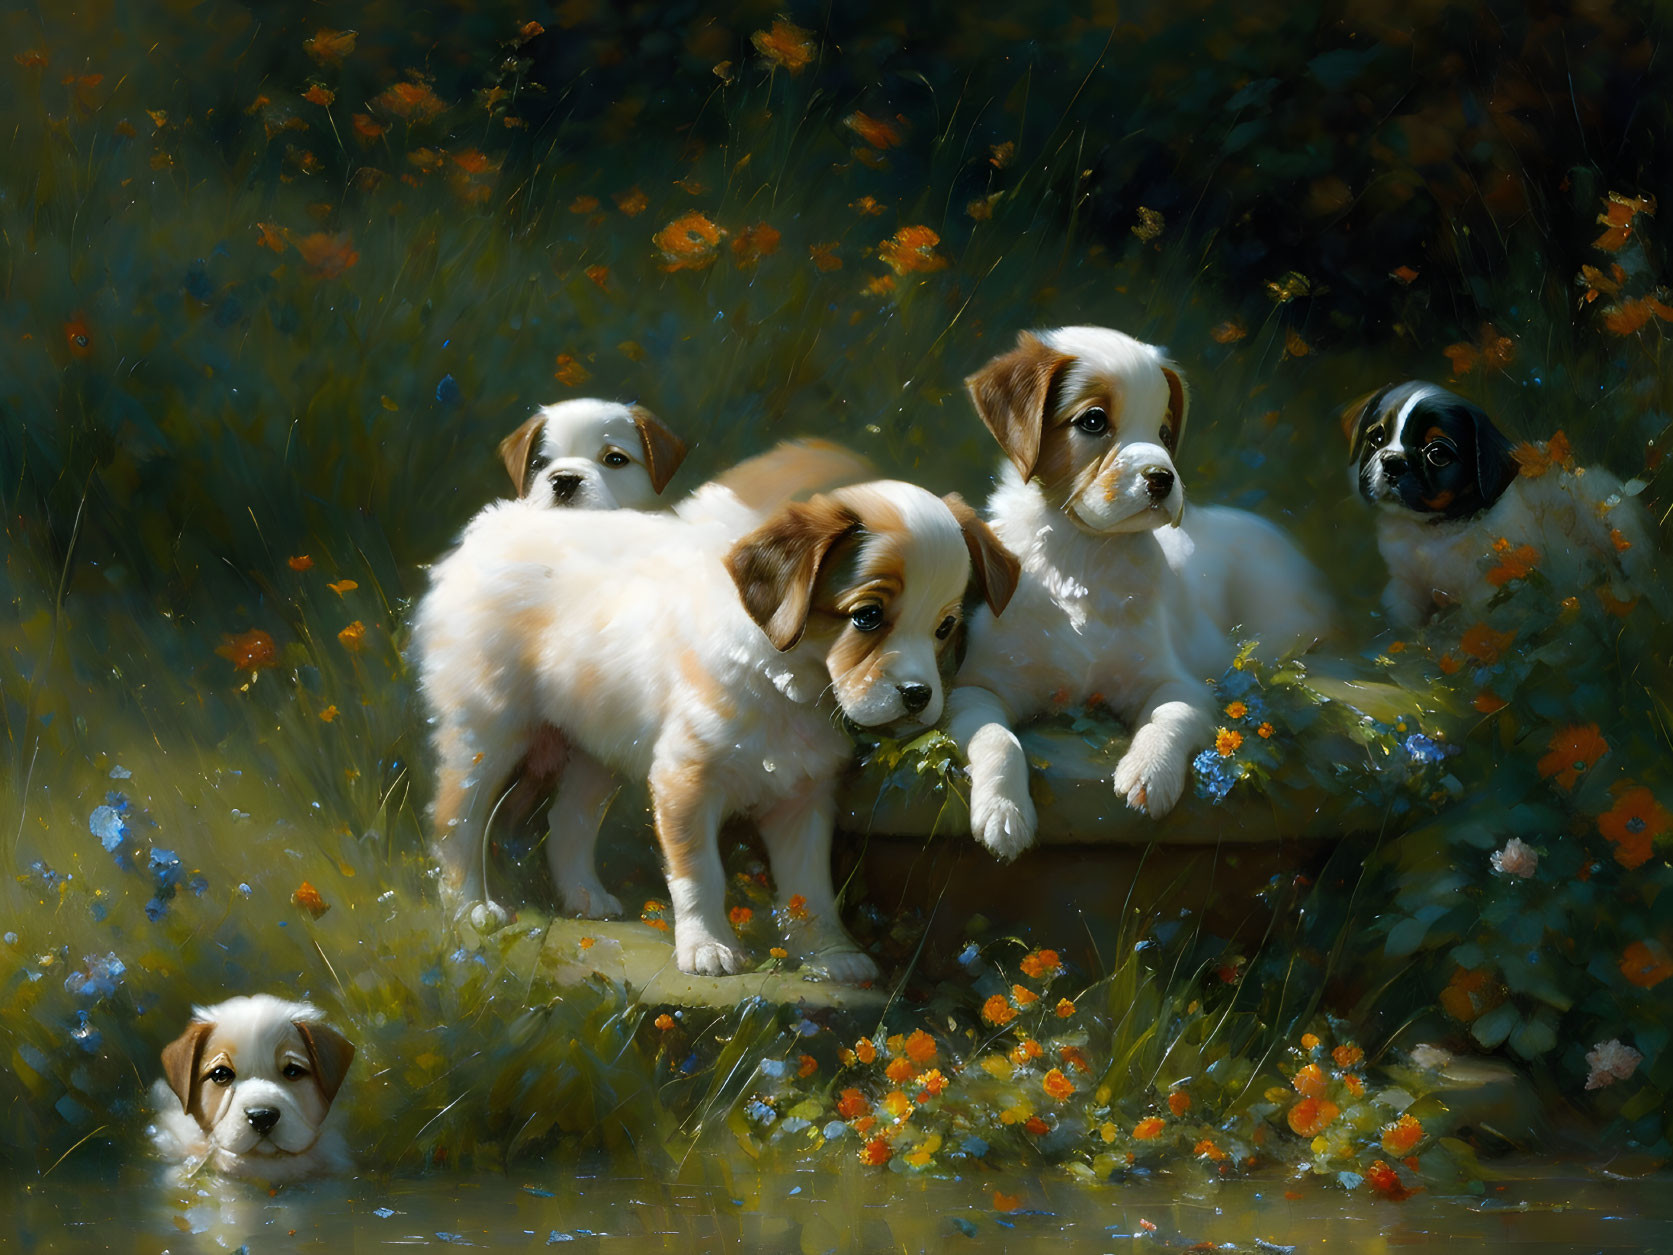 Five puppies playing on wooden plank in lush field with colorful flowers